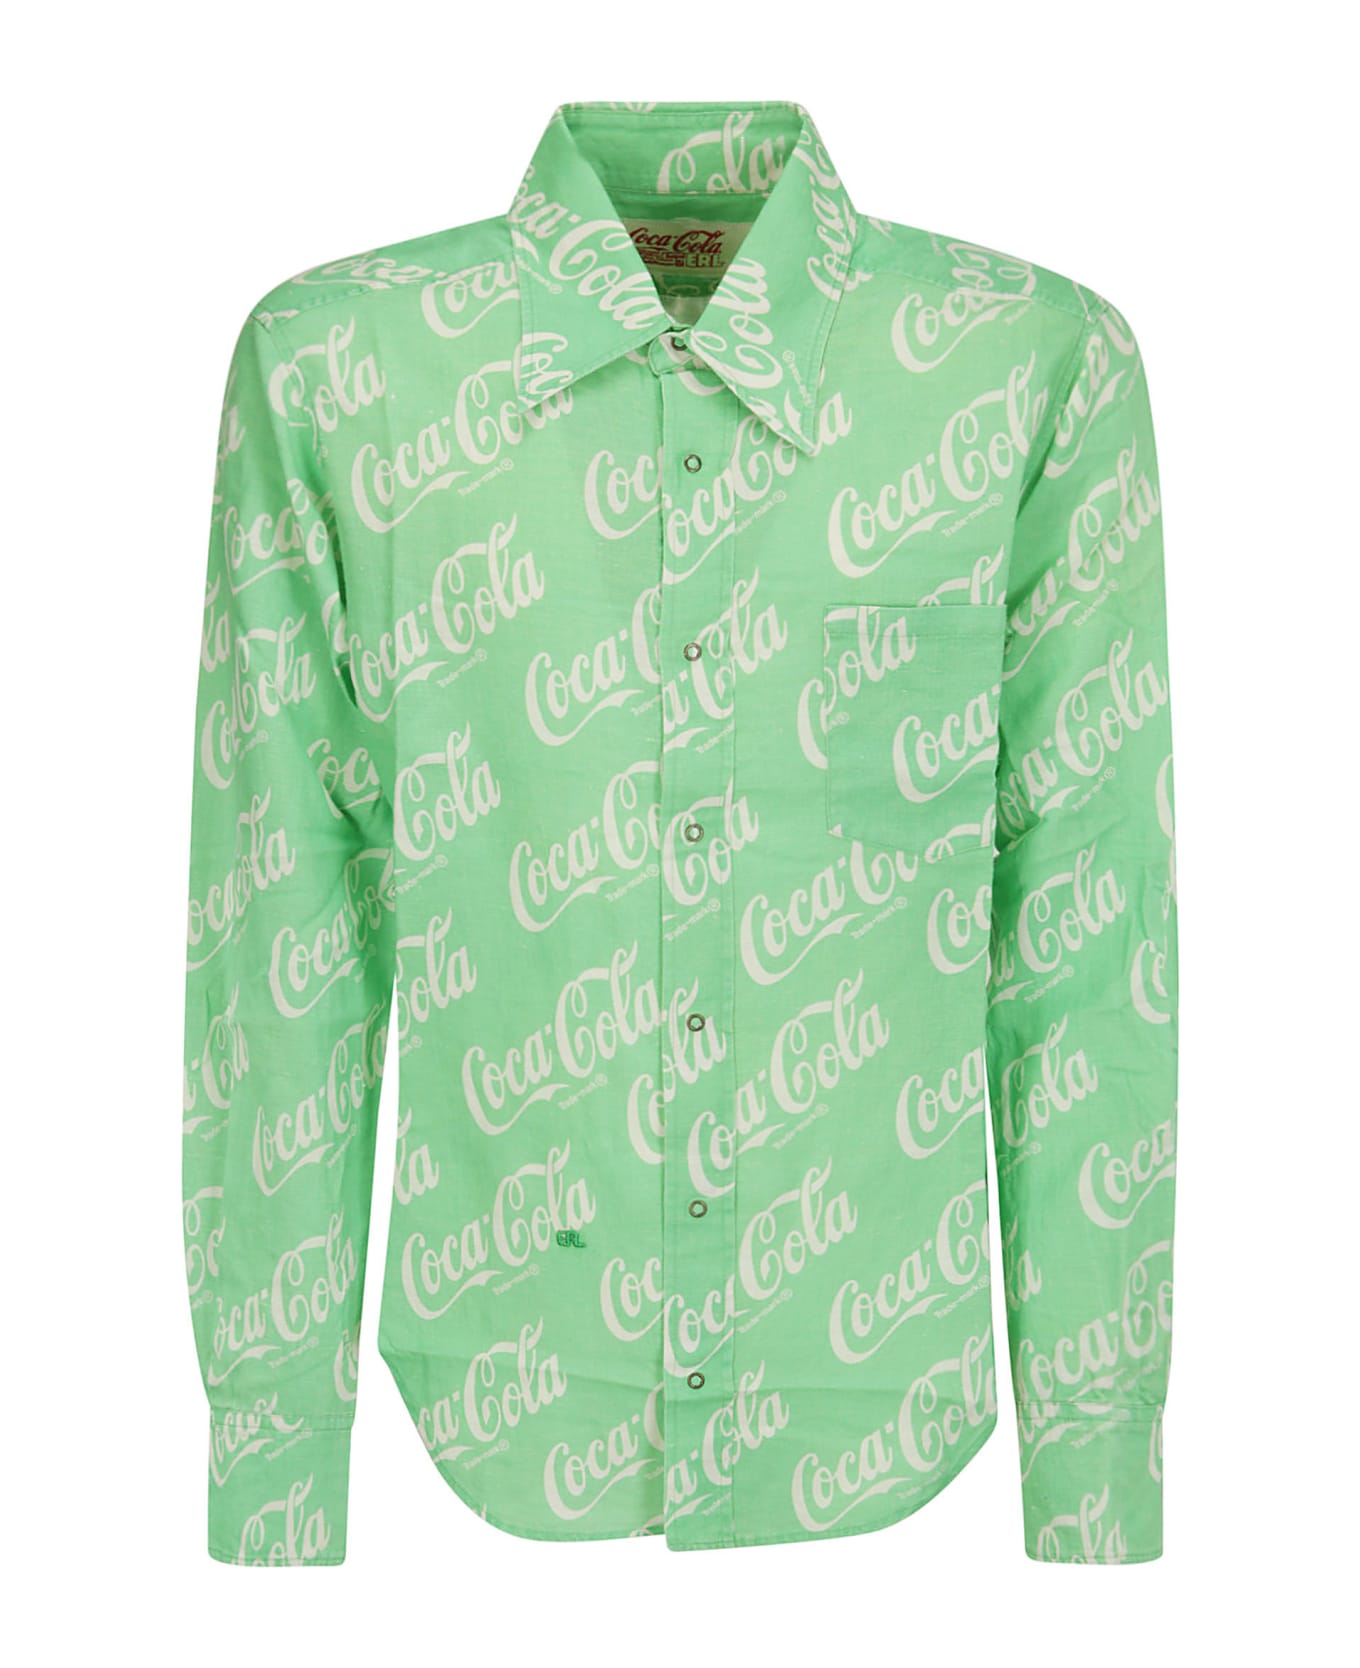 ERL Unisex Printed Button Up Shirt Woven - GREEN COCA COLA シャツ